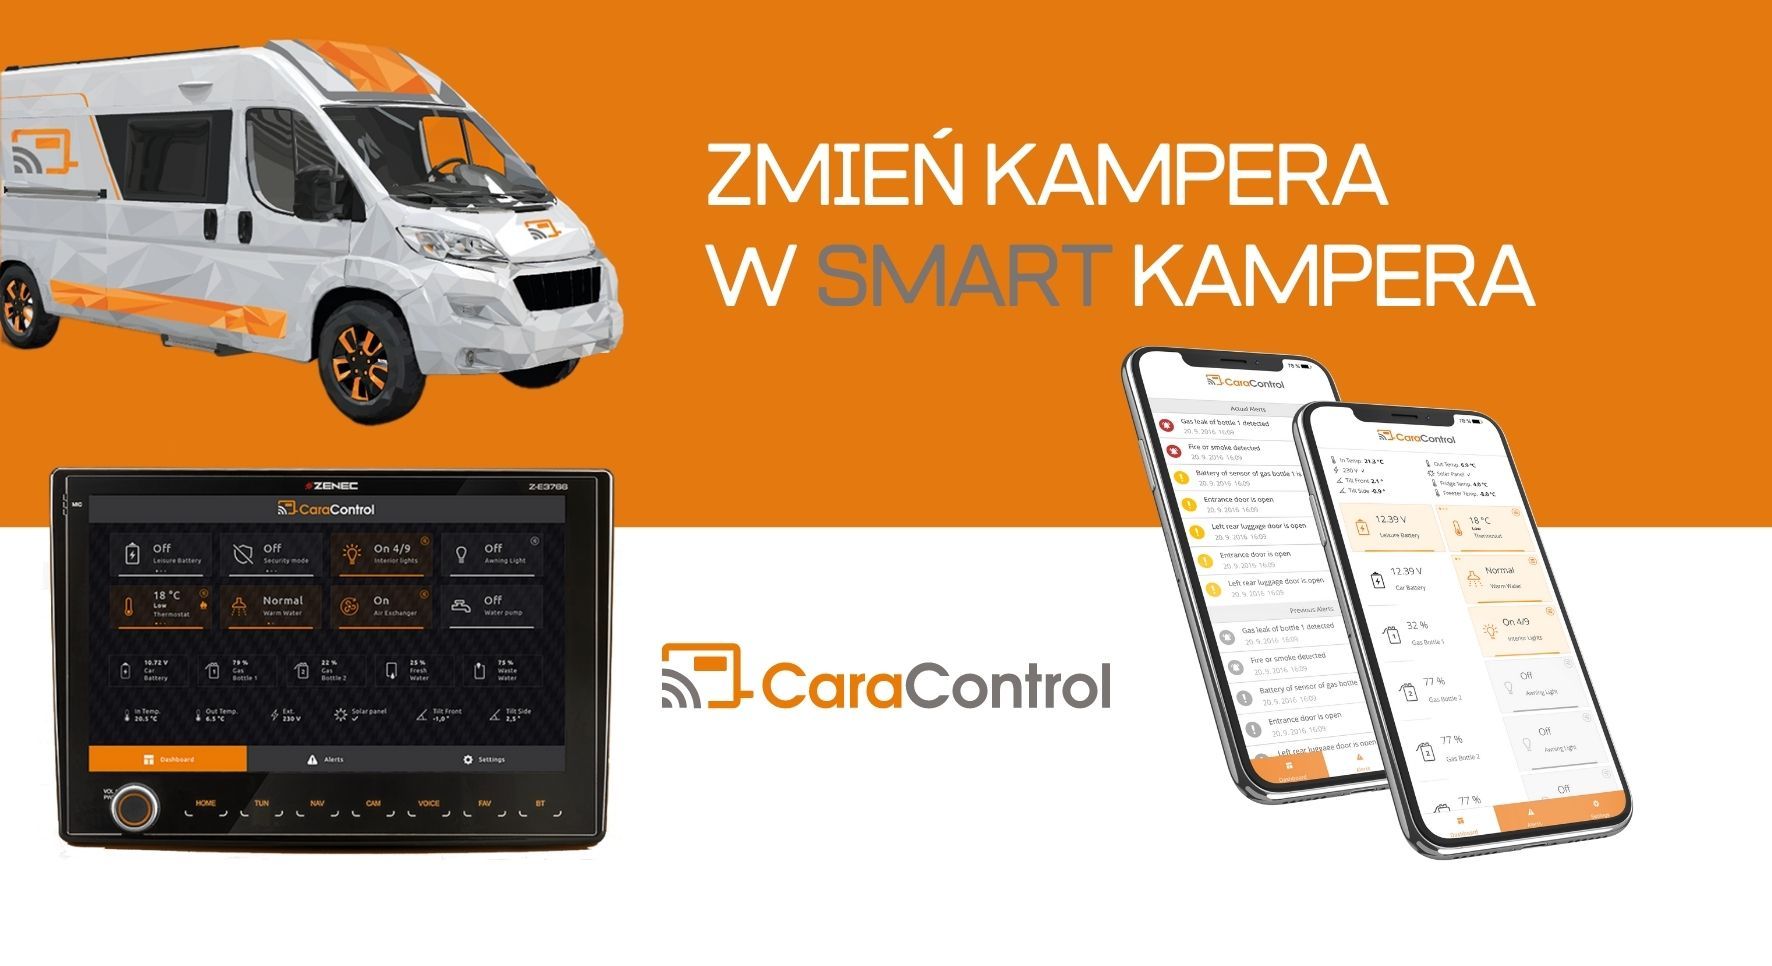 Smartphone controlled camper thanks to CaraControl – main image